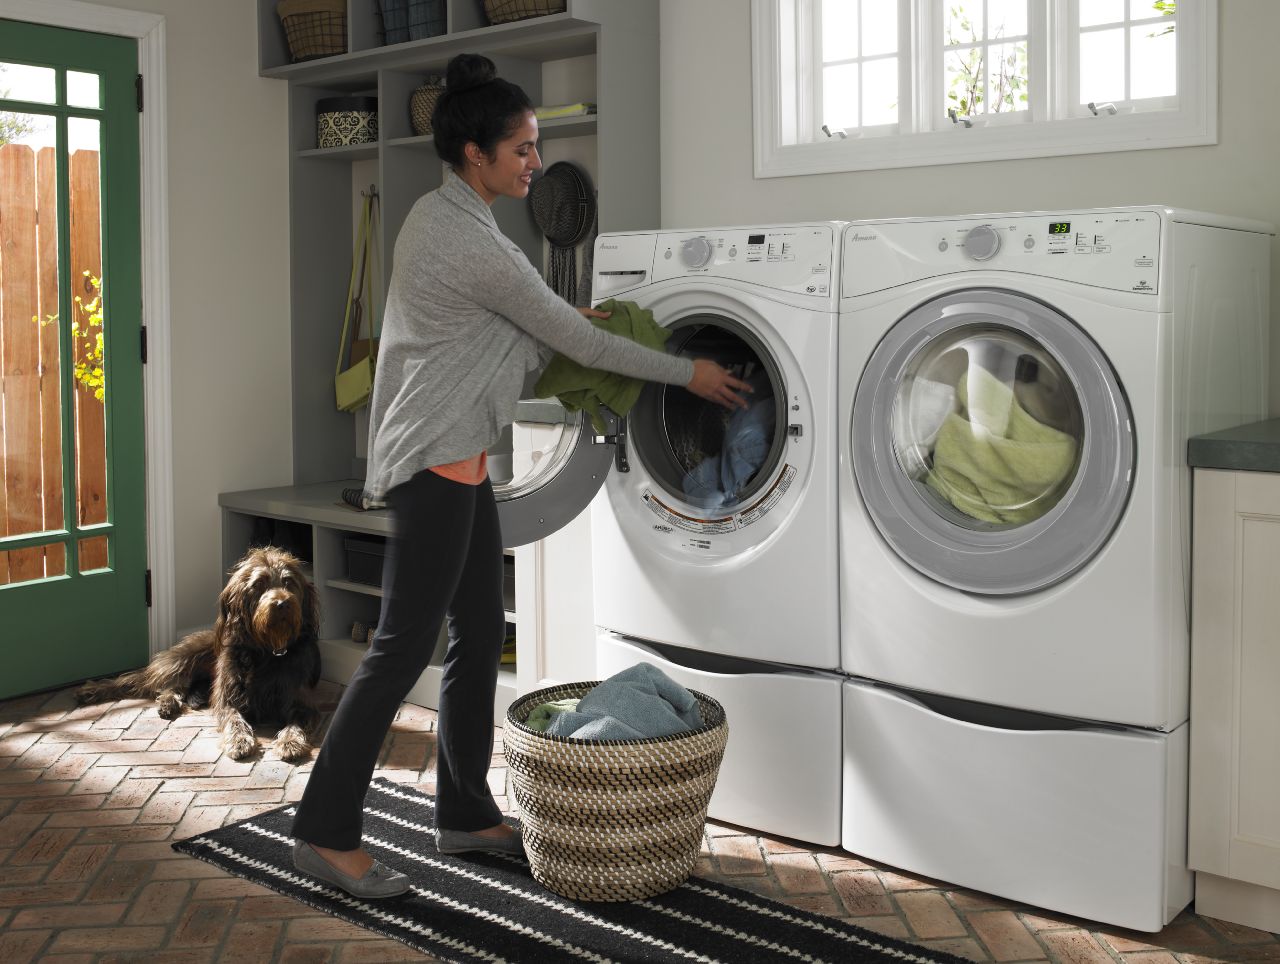 Person with washing machine having pumping issue